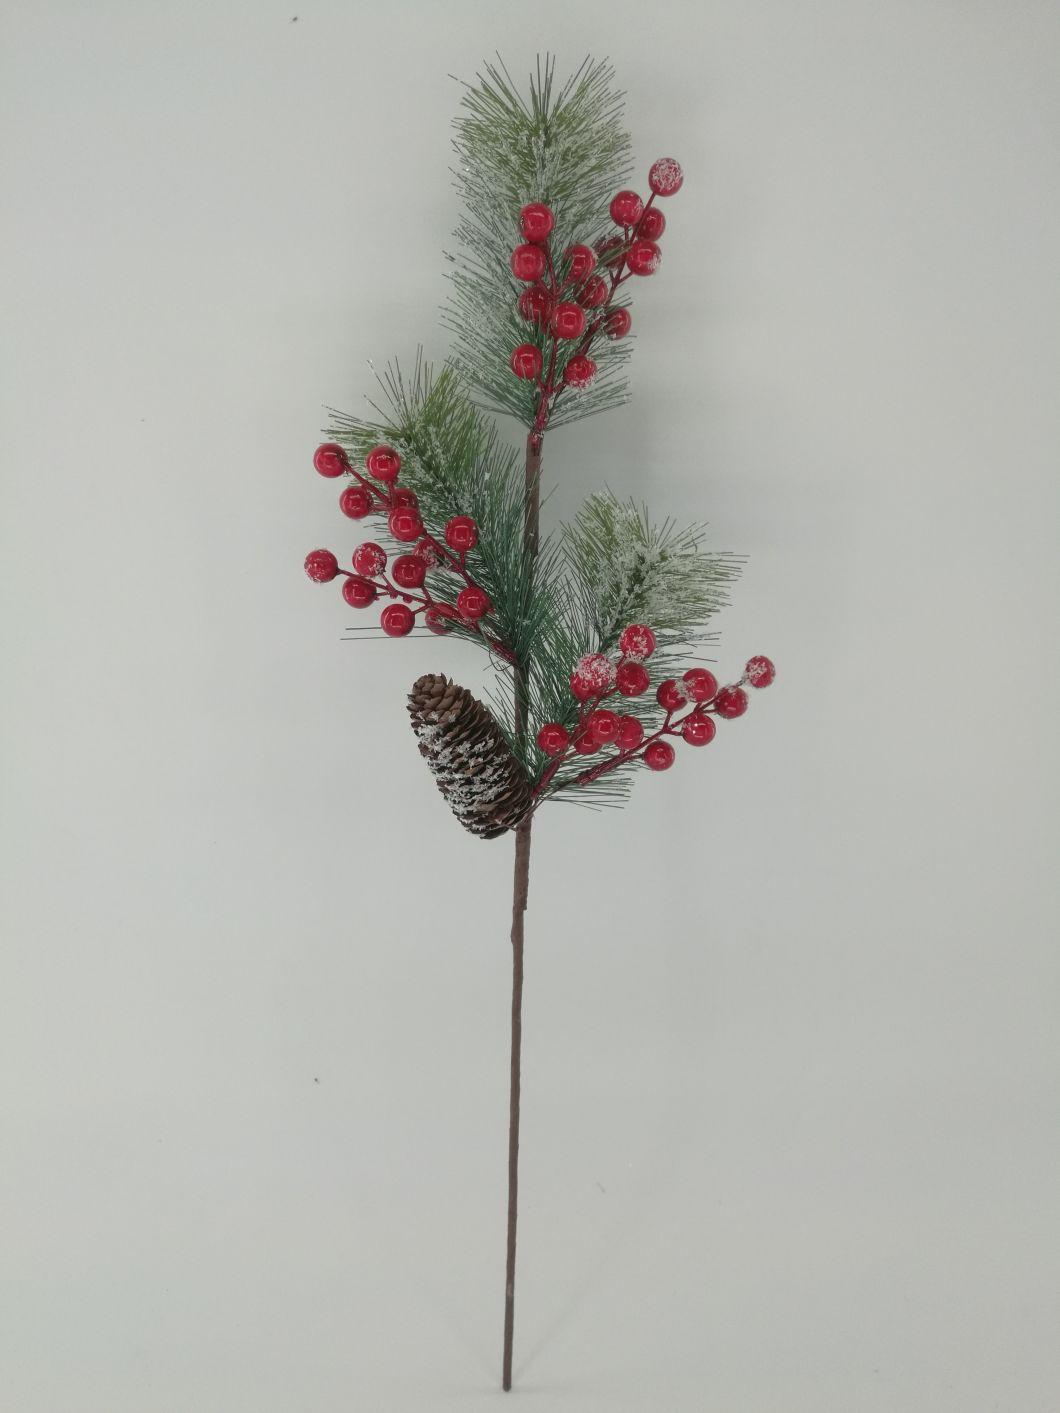 Wholesale Bulk Stems Farmhouses Pinecone Holly Artificial Berry Stems Christmas Branches